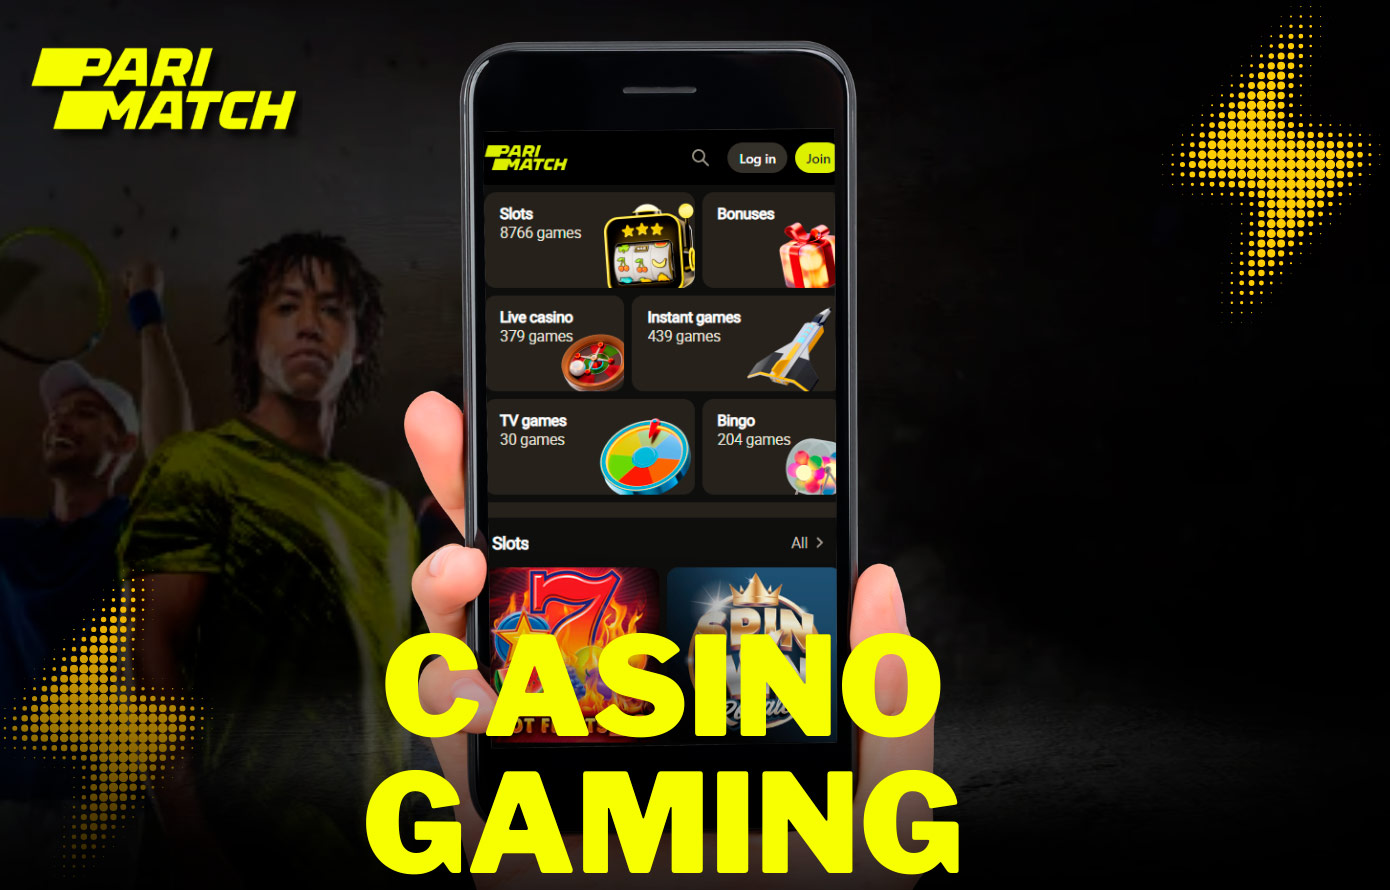 Casino games can be played in the Parimatch app